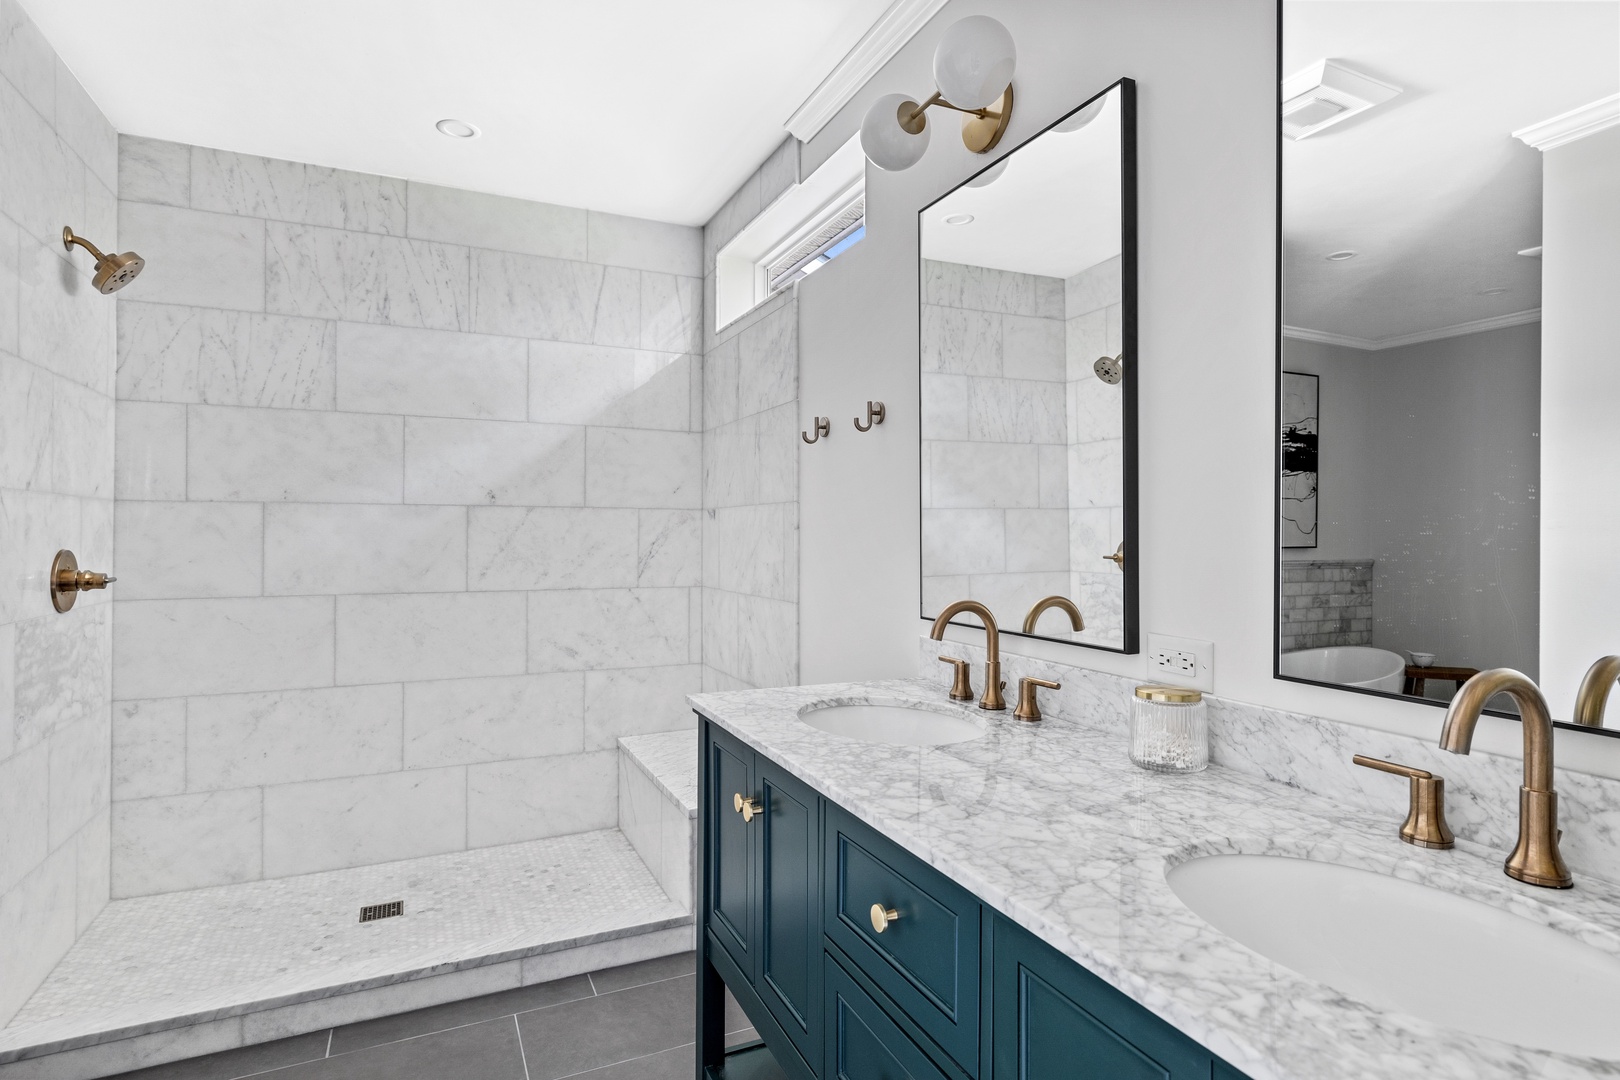 The spacious walk-in shower makes you feel like you’re staying in a 5-star hotel